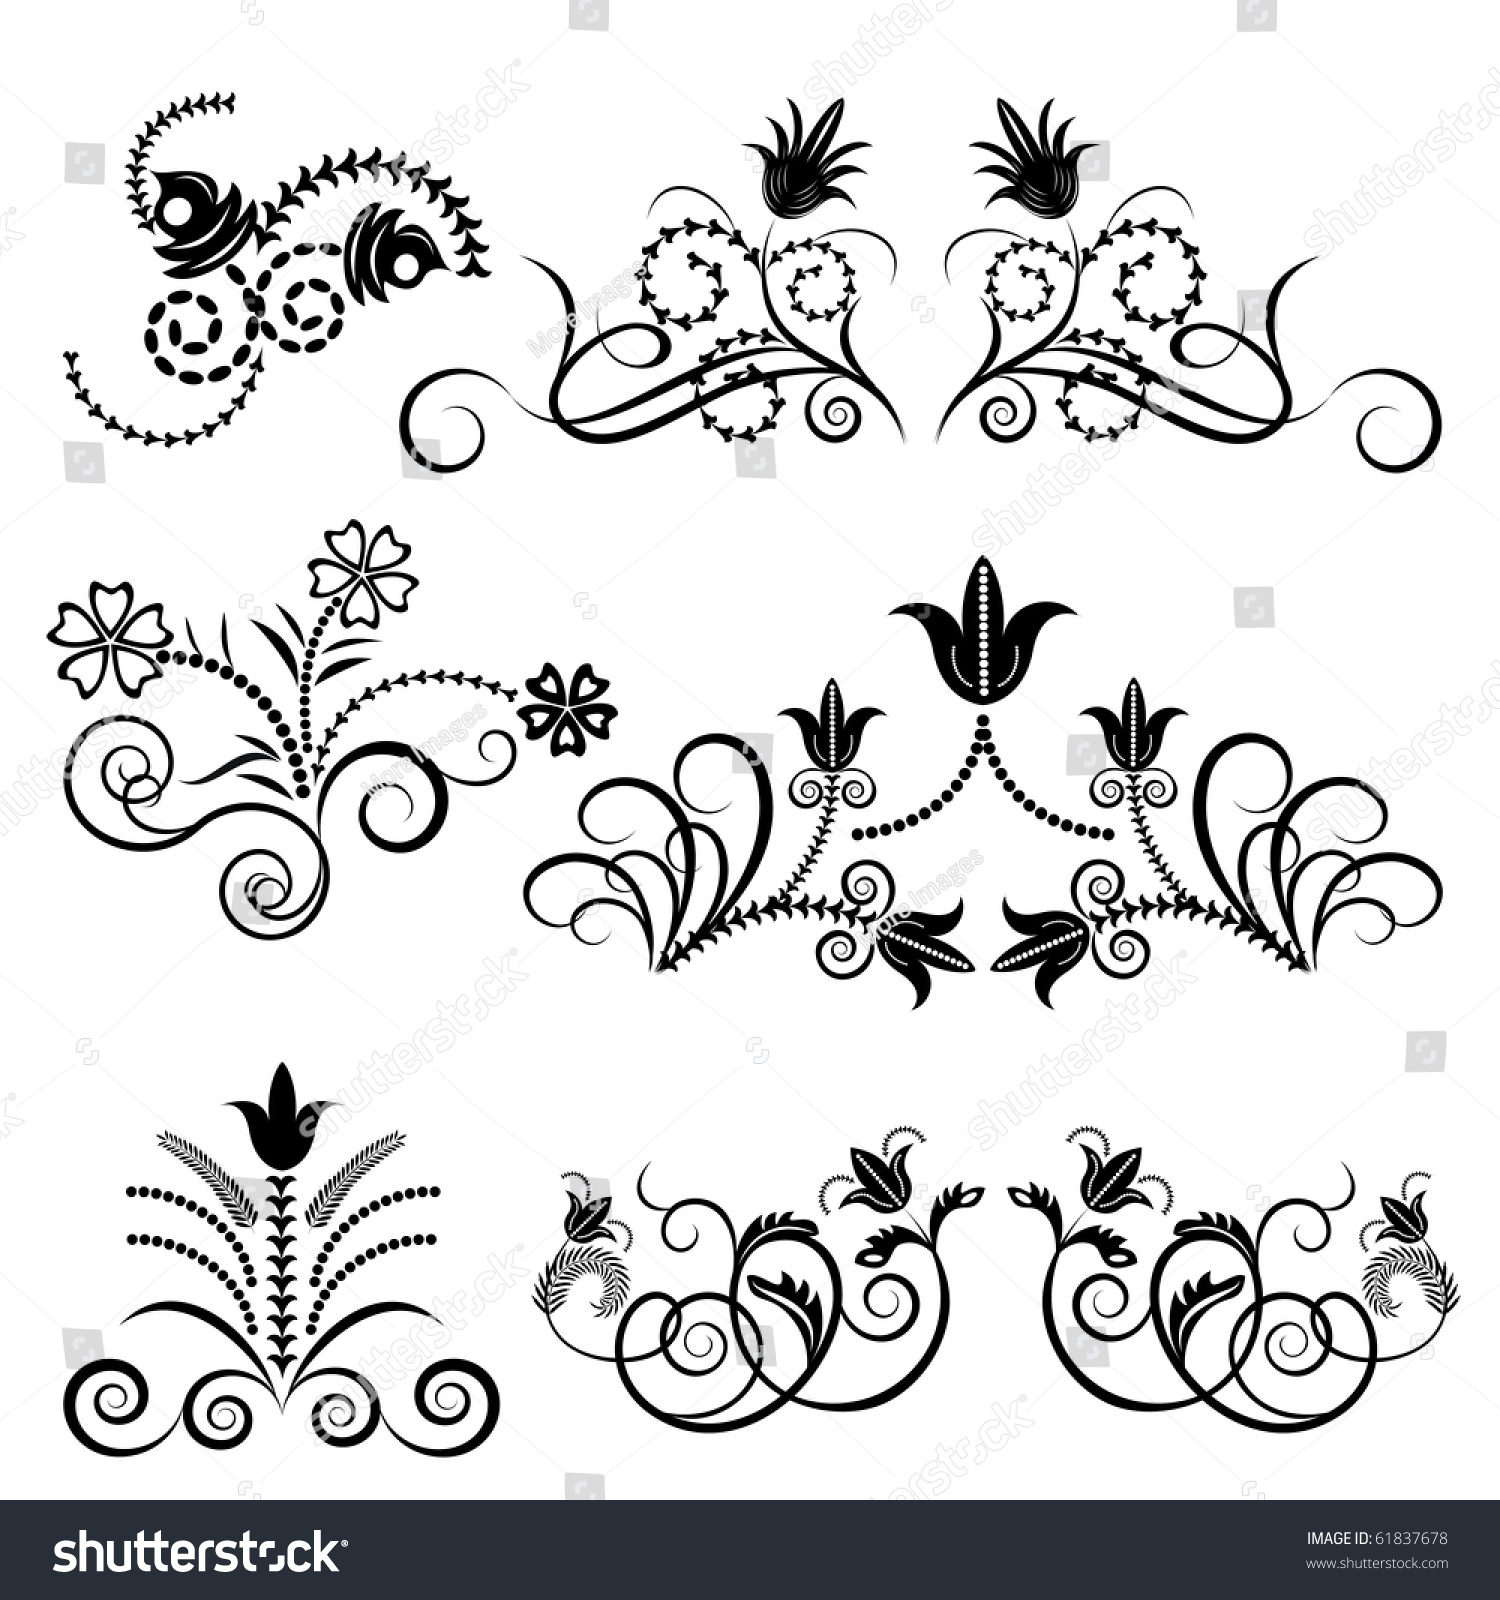 Black And White Floral Vector Set. - 61837678 : Shutterstock